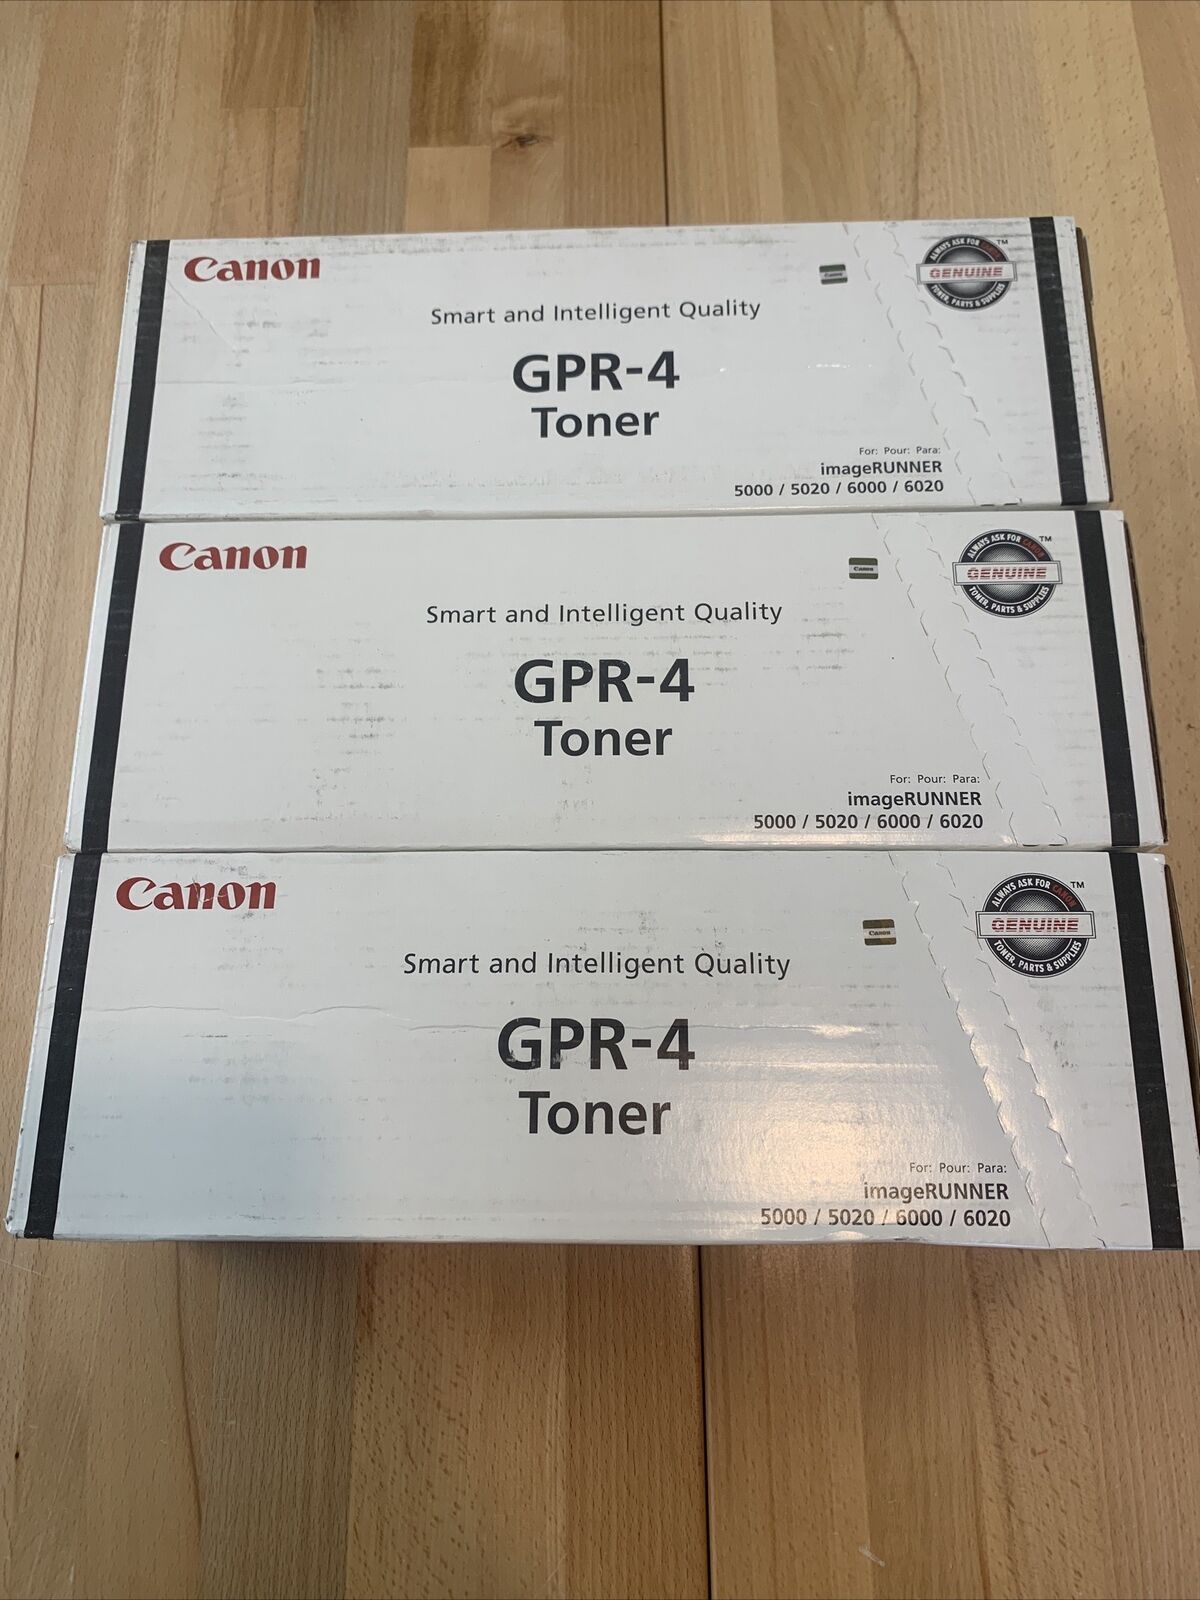 Lot of 3 Genuine Canon GPR-4 Toners  imageRUNNER 5000 6000 New in Box